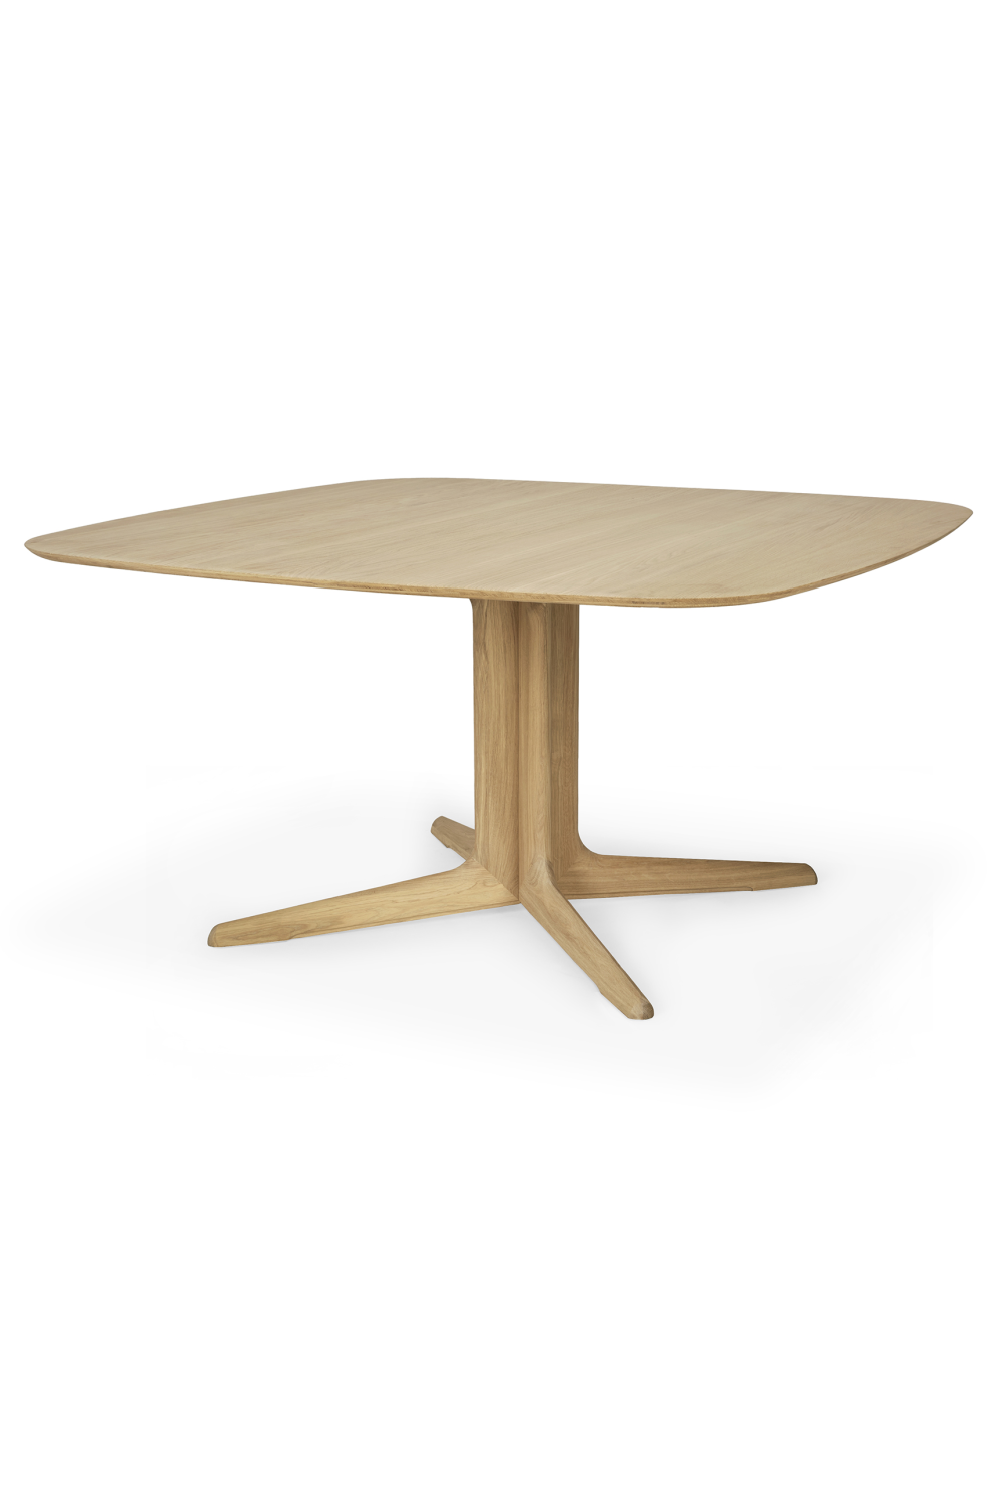 Central-Footed Oak Dining Table | Ethnicraft Corto | Oroa.com